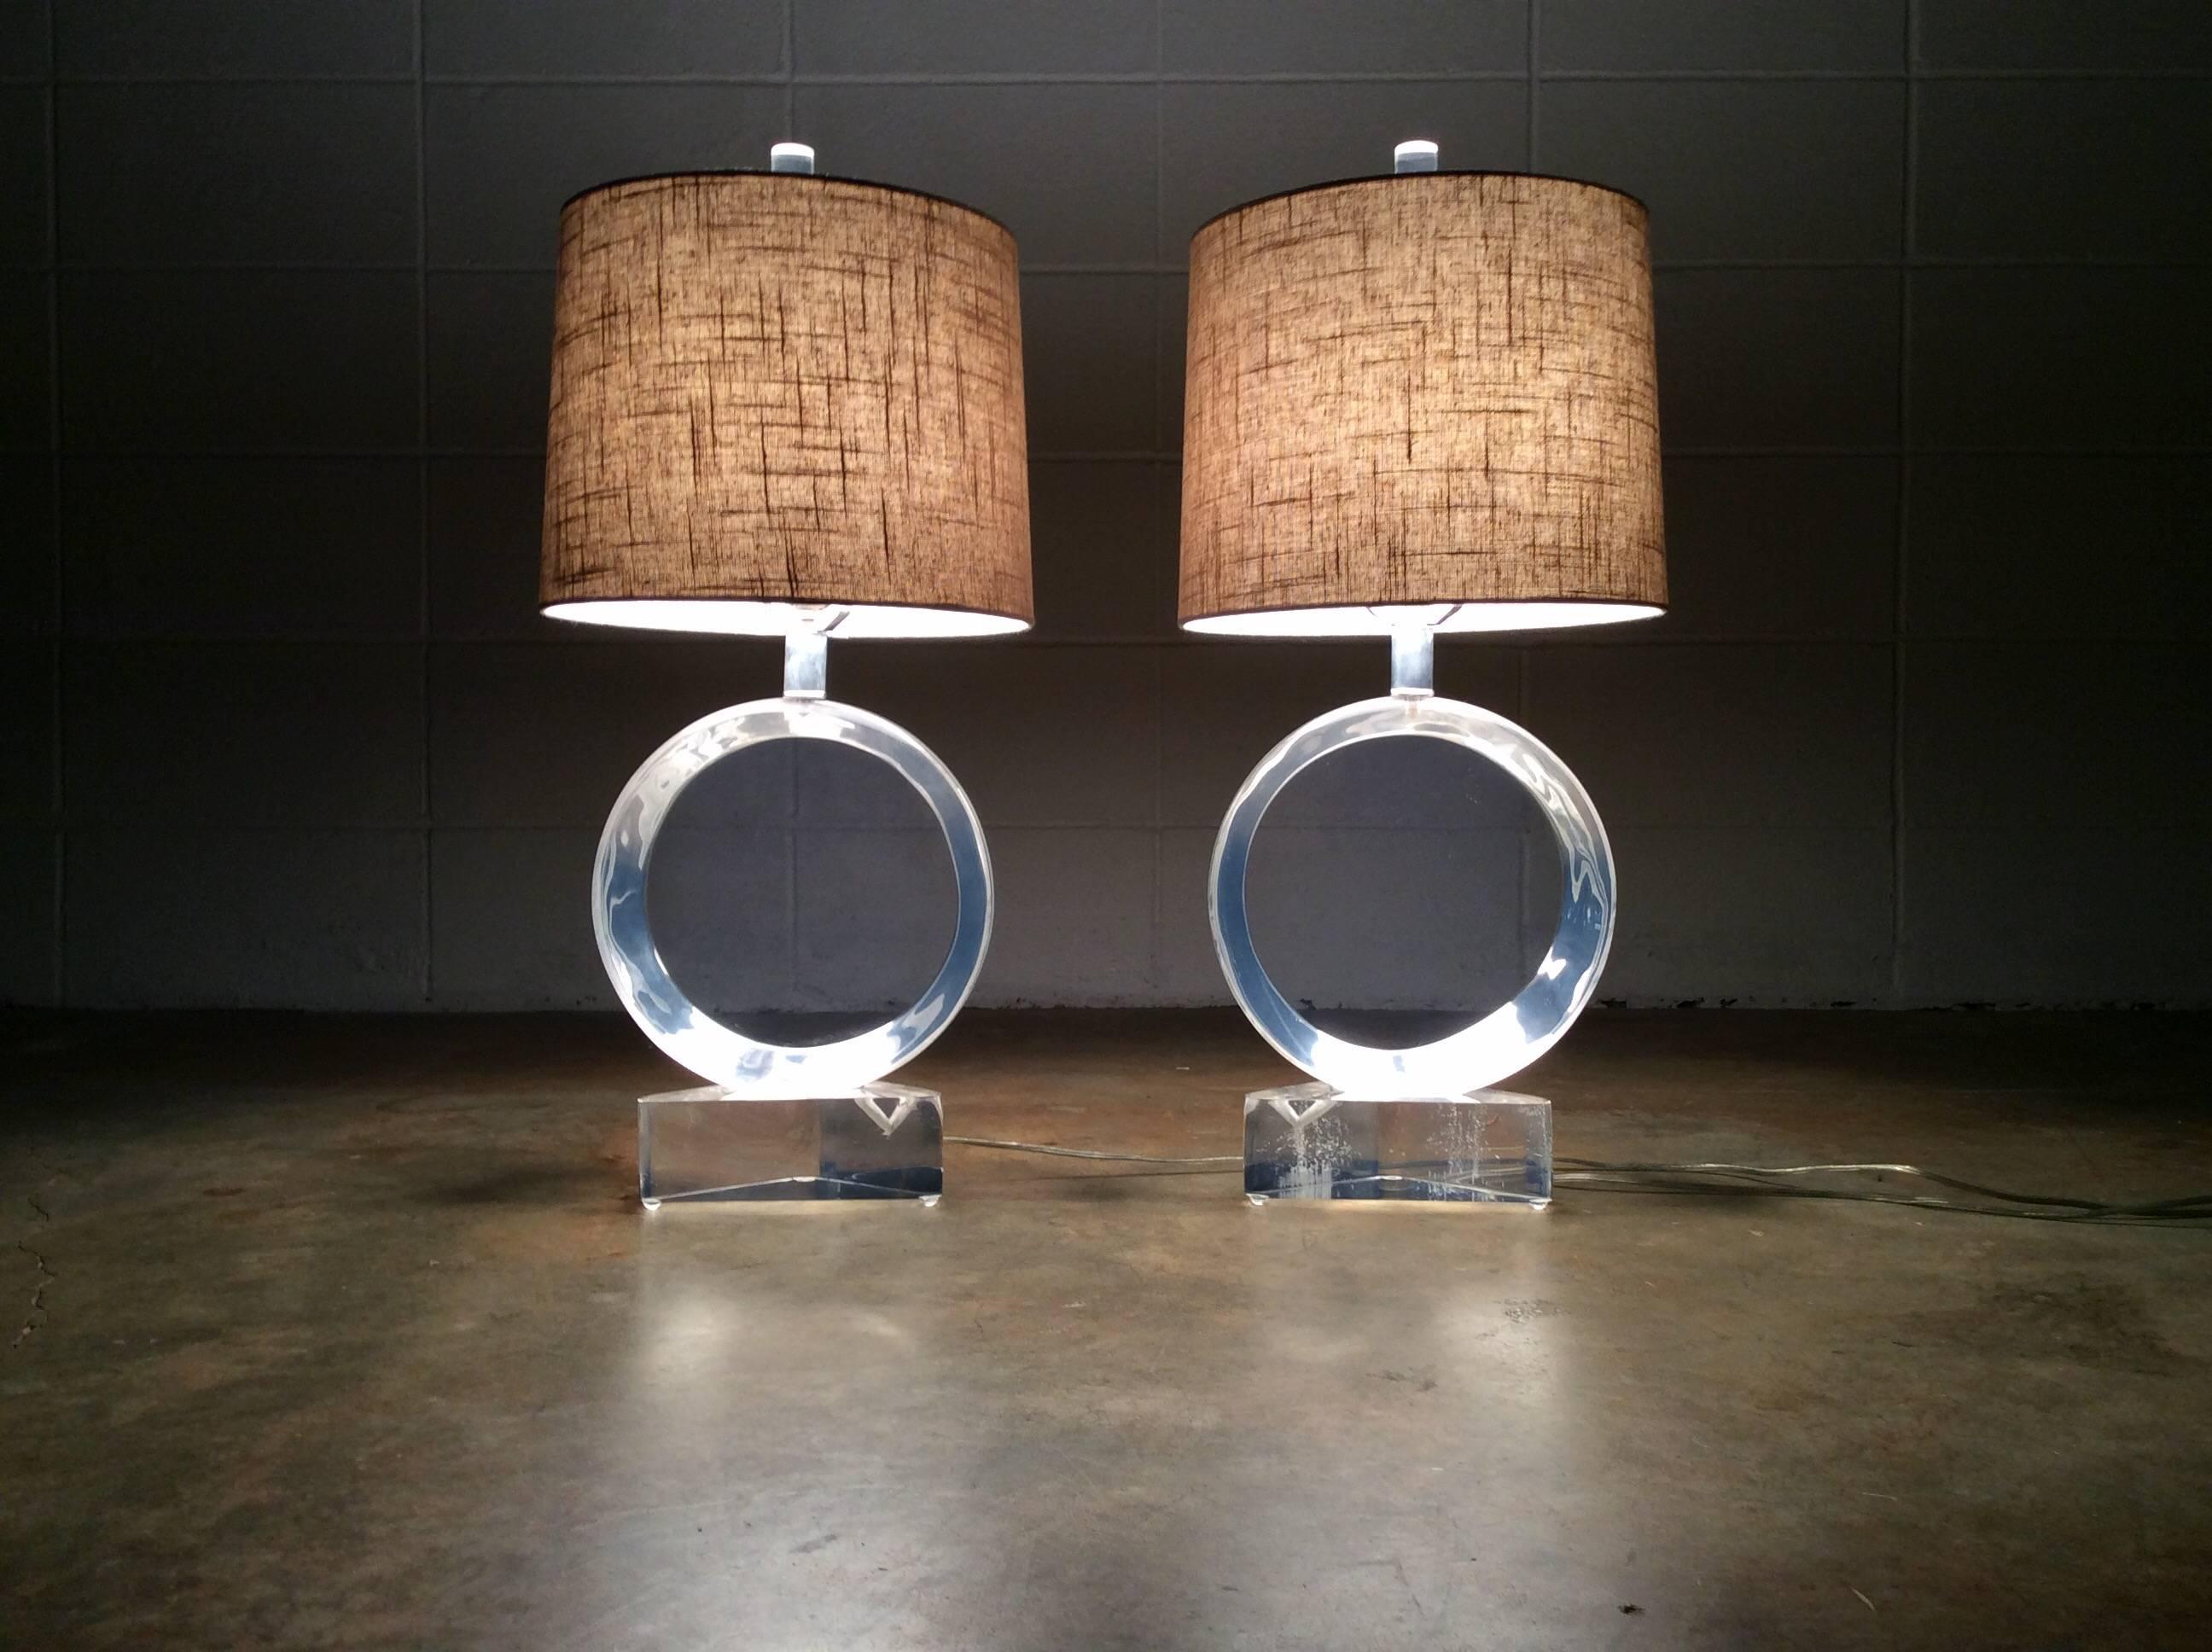 Stunning pair of 1980s sculpted Lucite table lamps signed by Van Teal. Hivo Van Teal is known for exceptional works of art and design in sculpted Lucite. These table lamps are no exception. The lamps are still very clear with only very minimal wear.